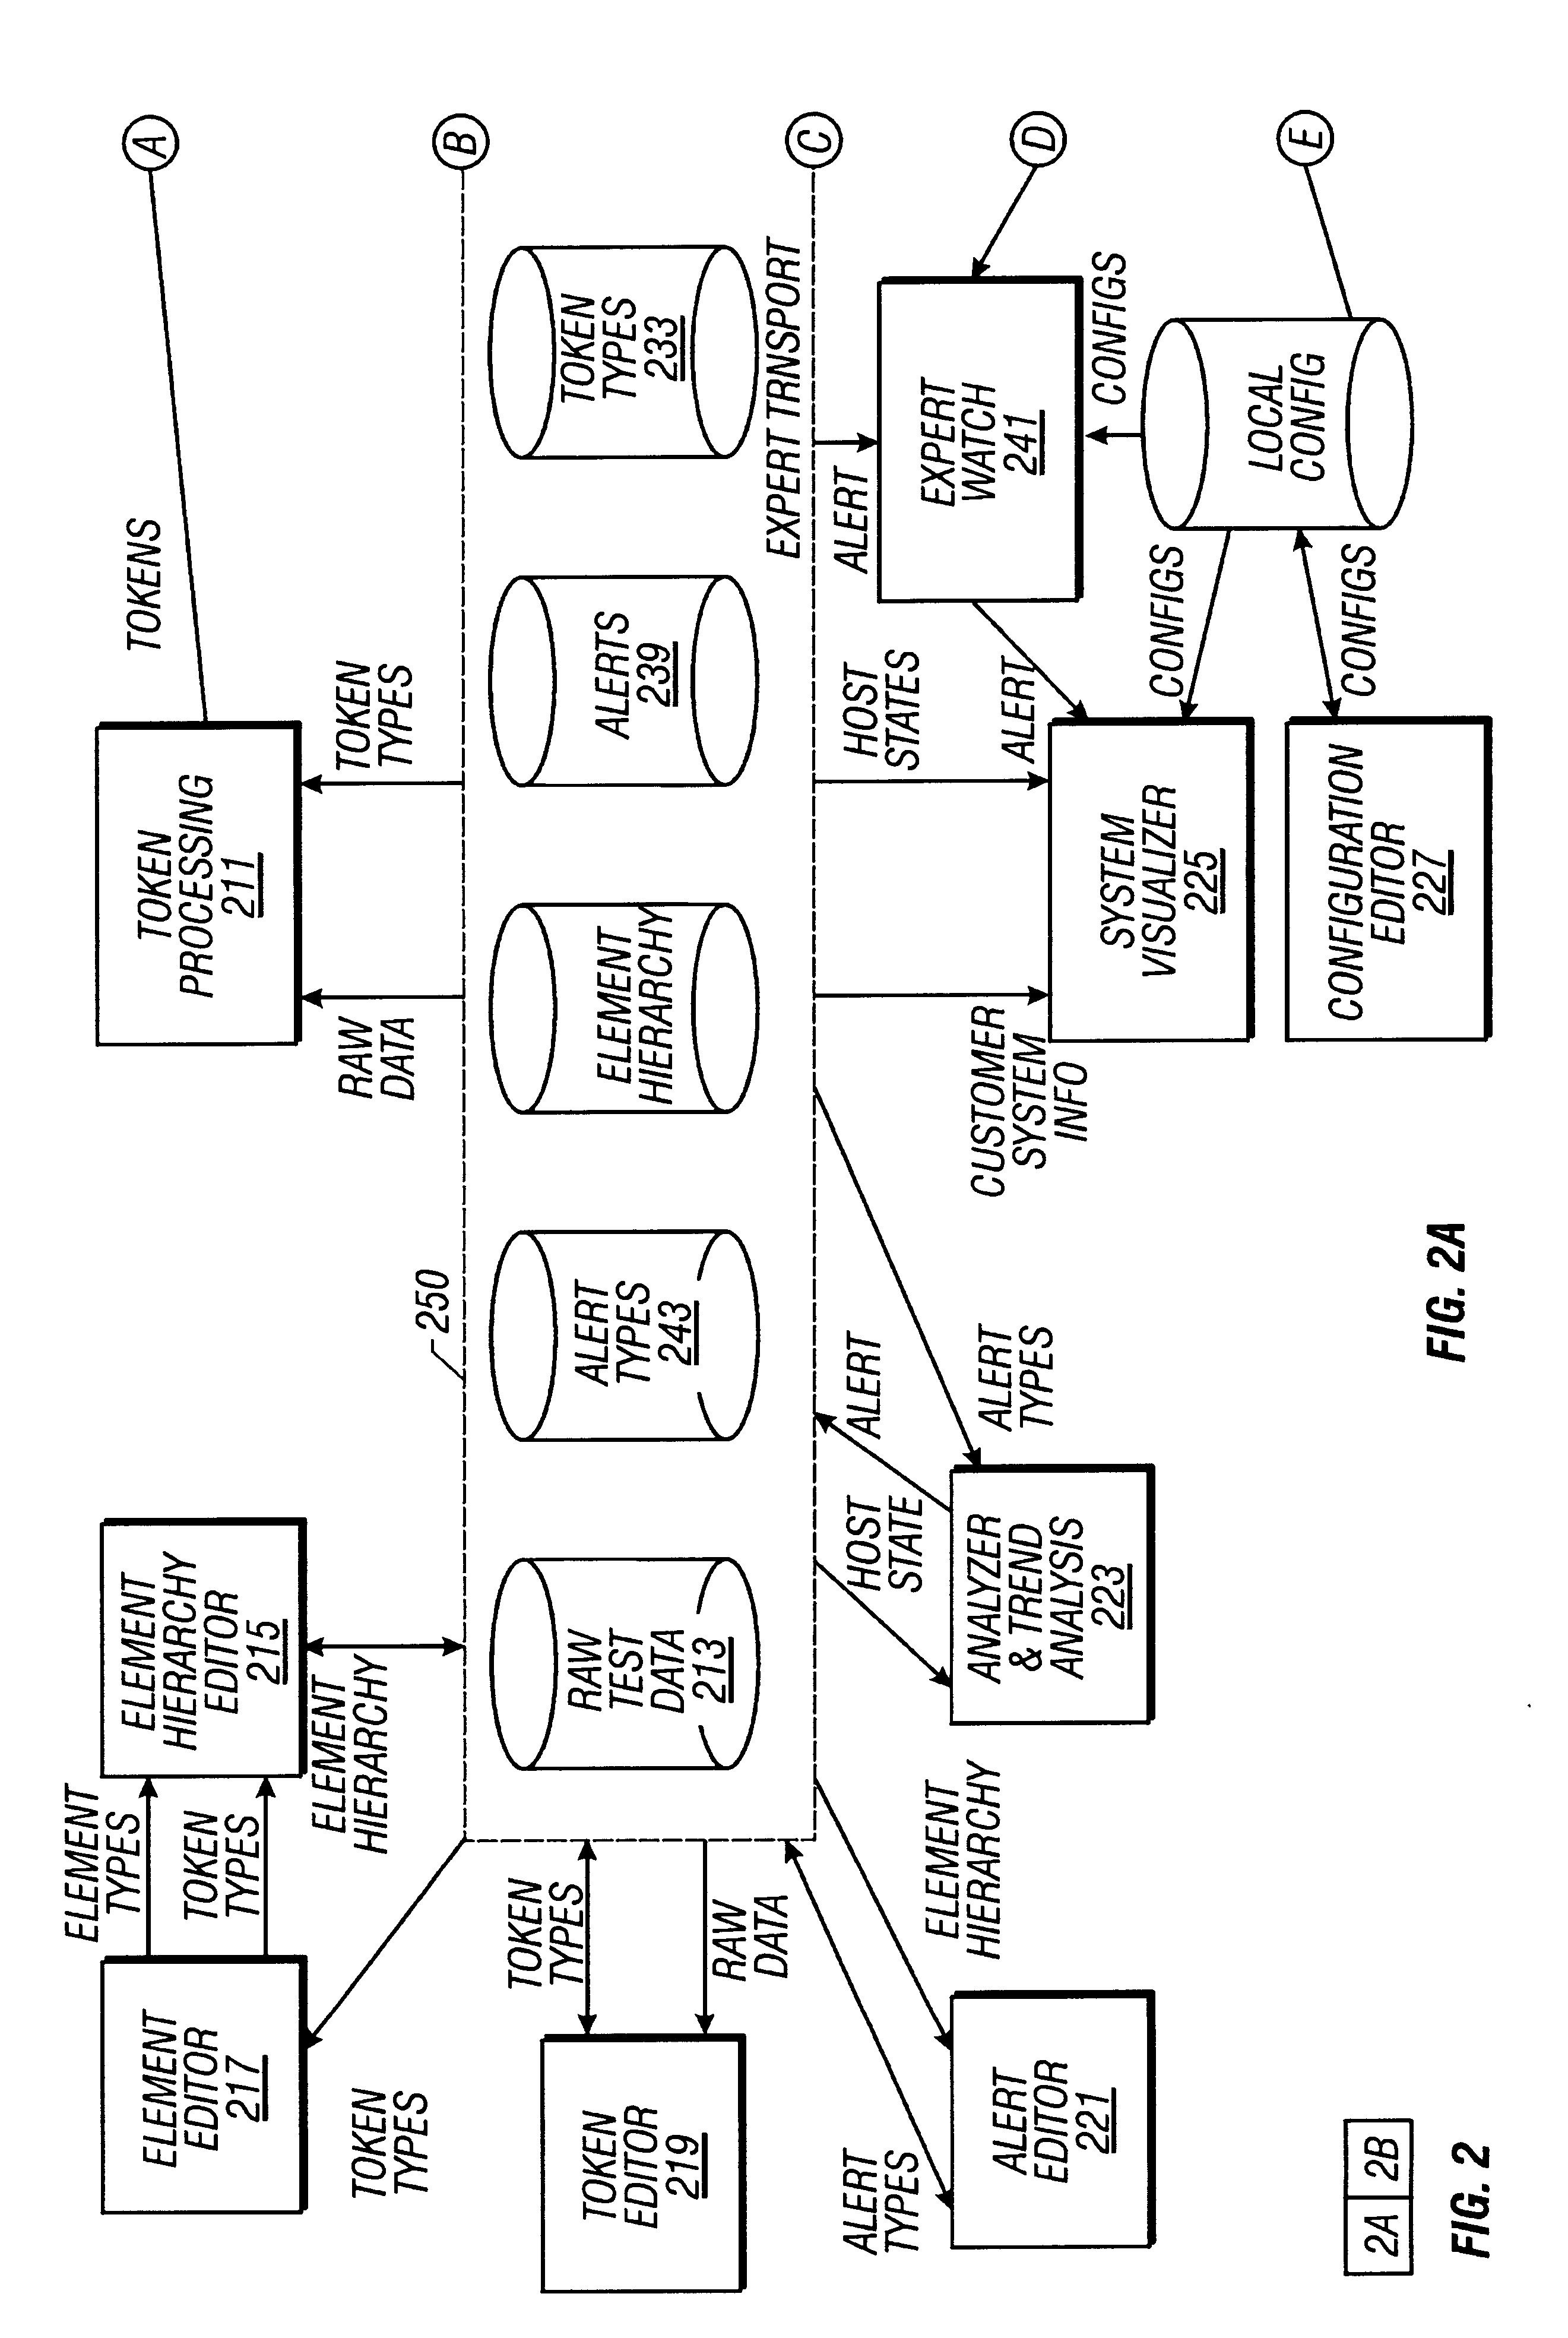 System and method for evaluating monitored computer systems